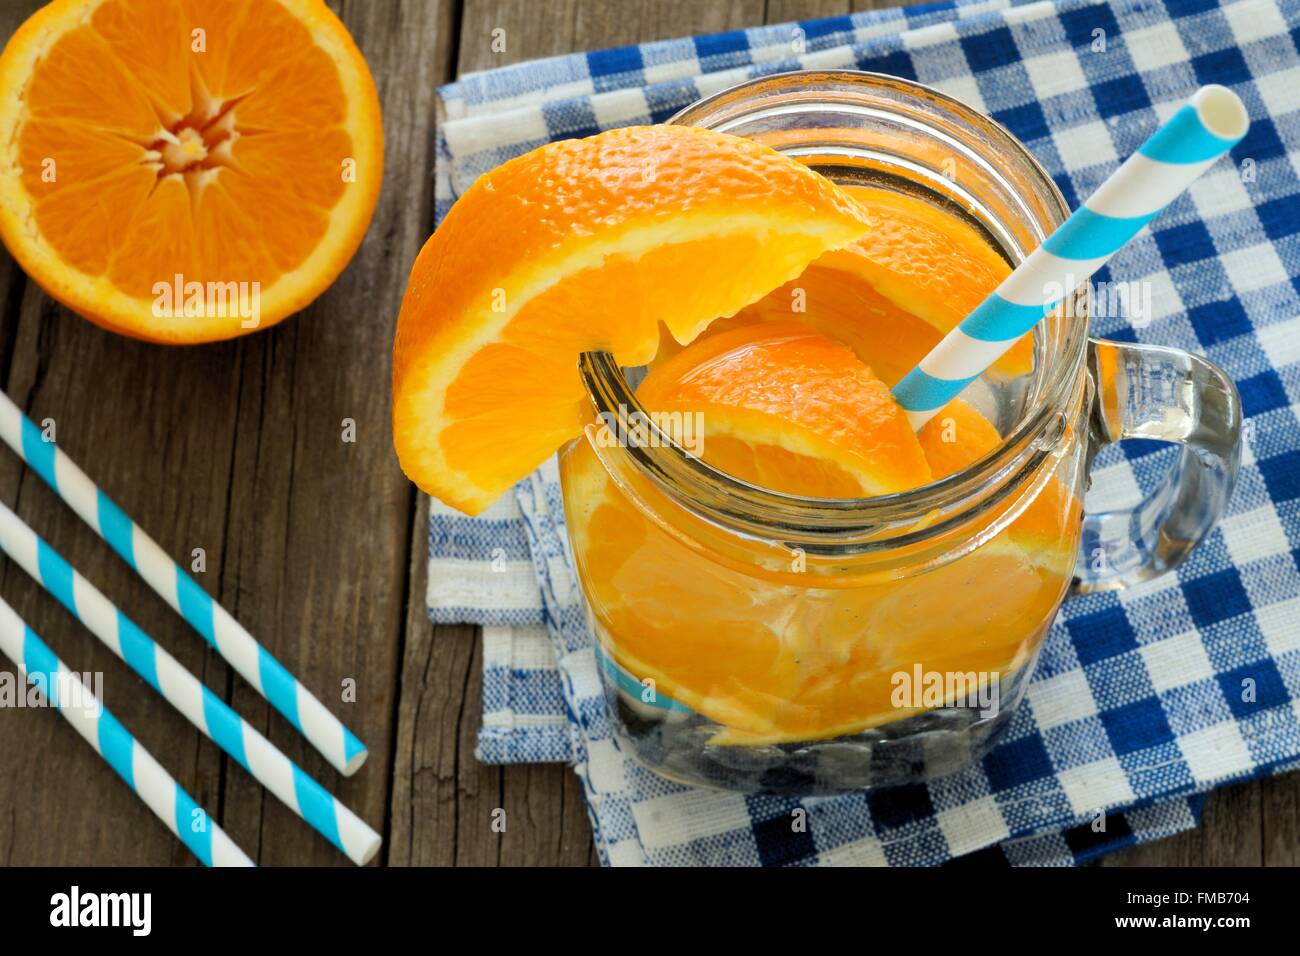 Detox water with oranges and blueberries in a mason jar with straw. Downward view on wood with checkered cloth. Stock Photo